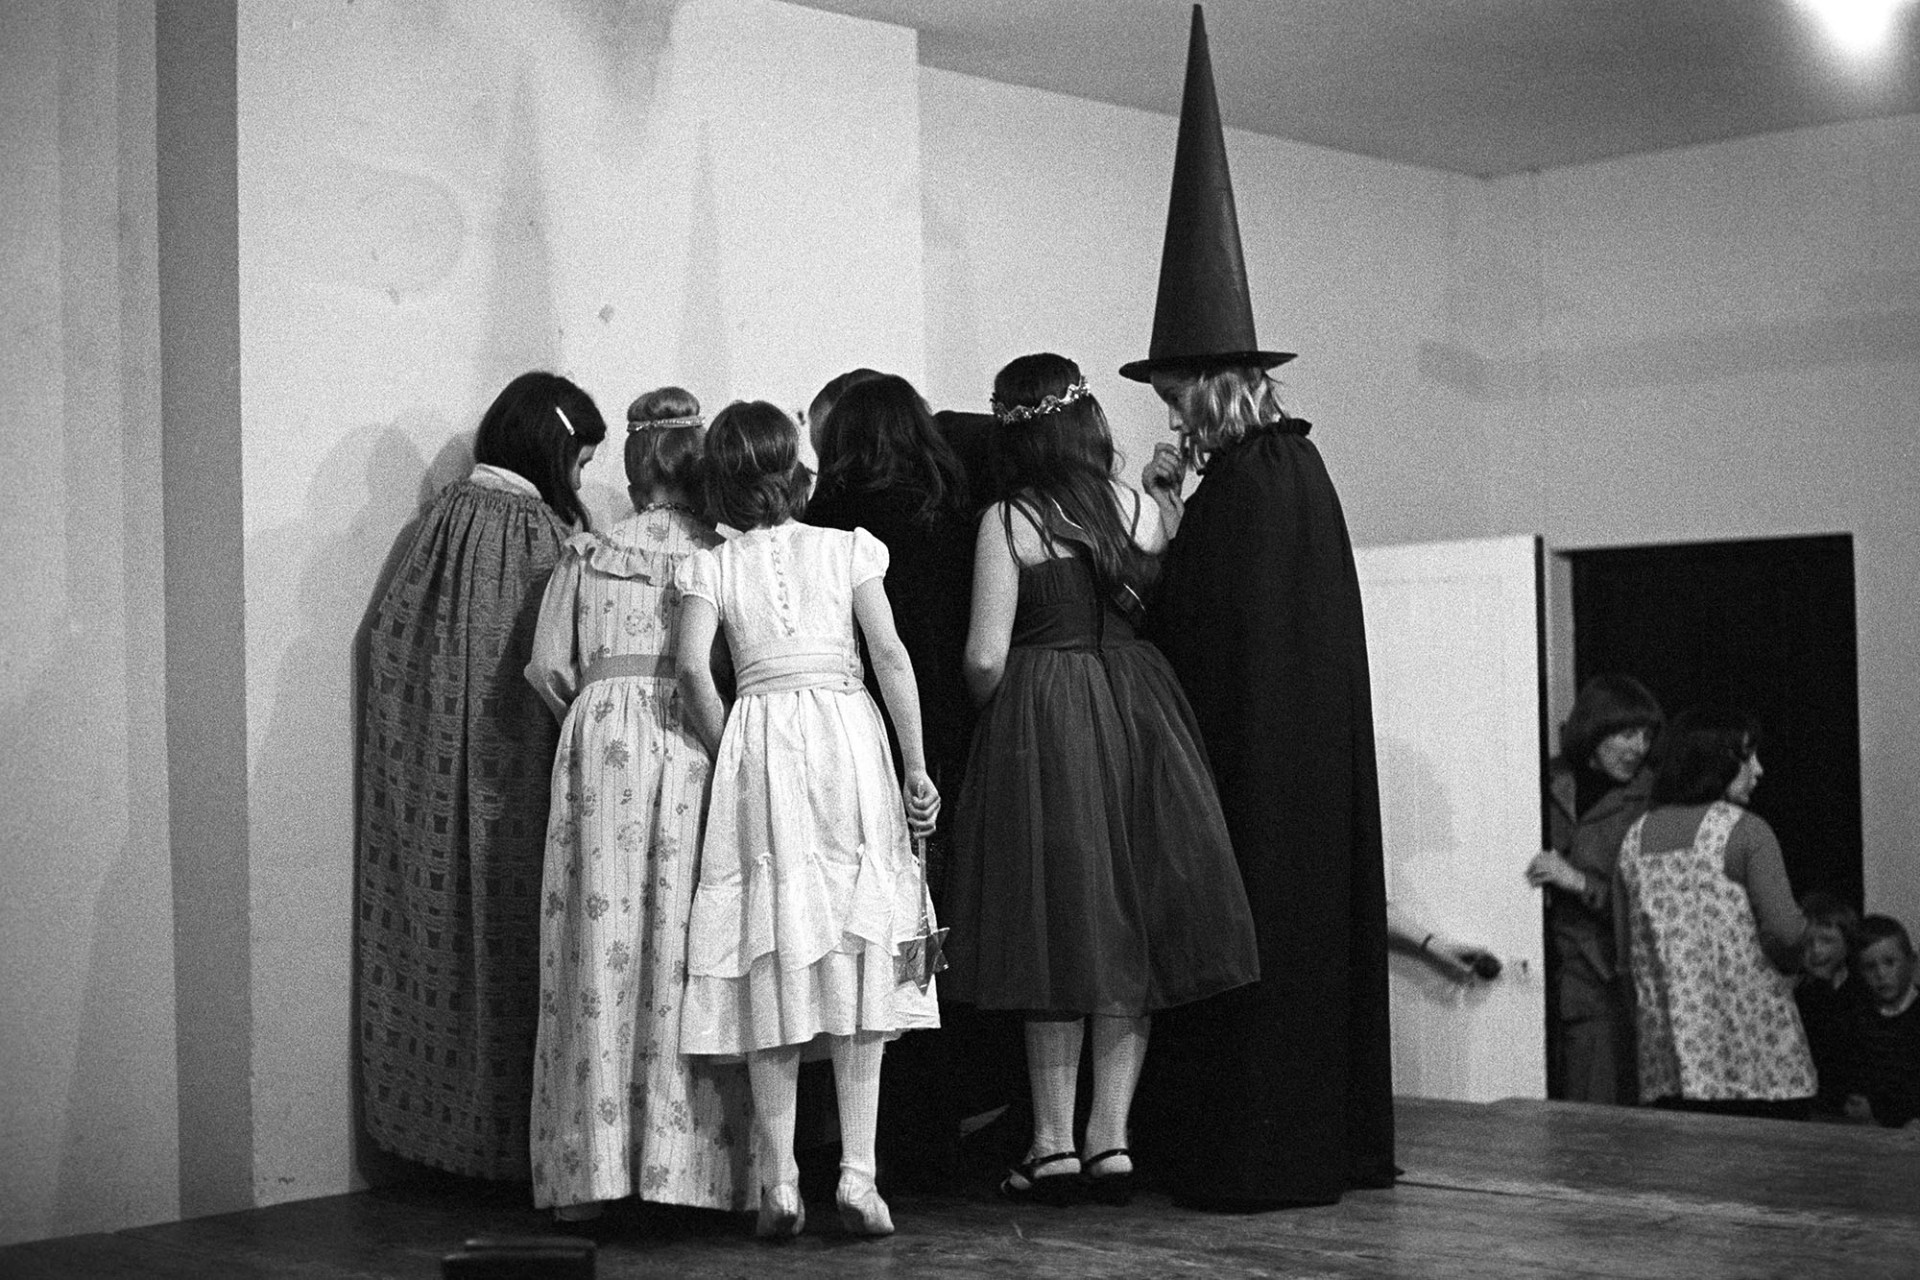 Children performing at school concert.
[Children performing at St Giles in the Wood School concert. One of the children is dressed as a witch.]